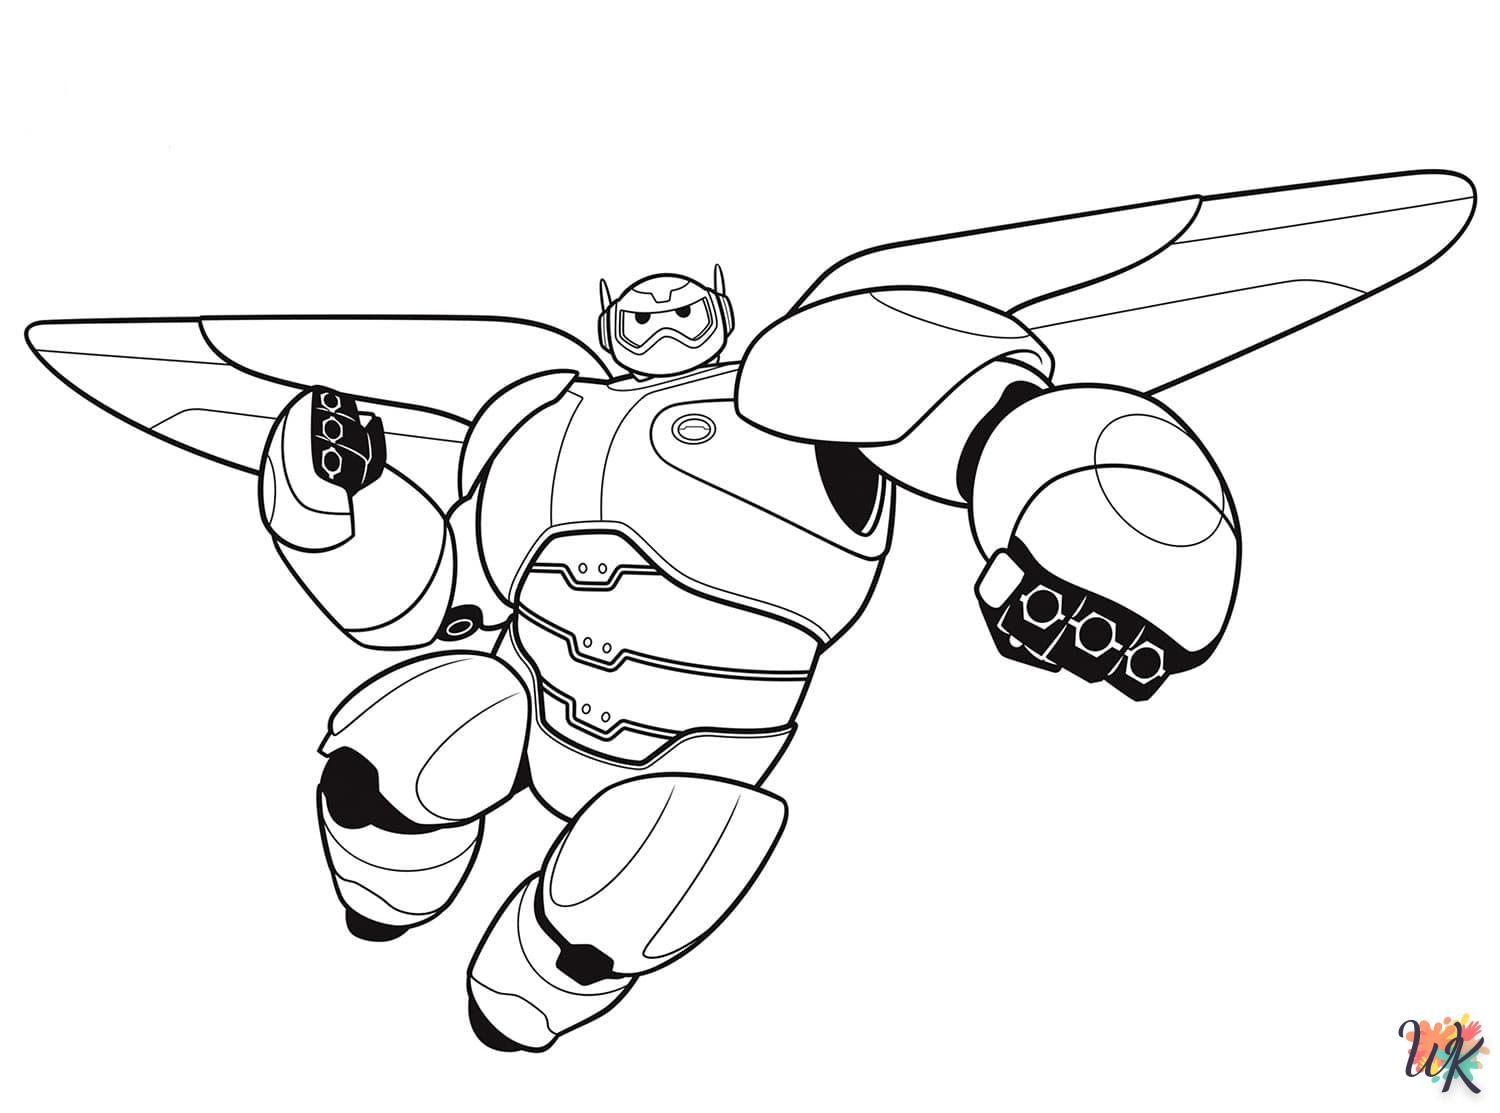 Robot coloring page for children to print